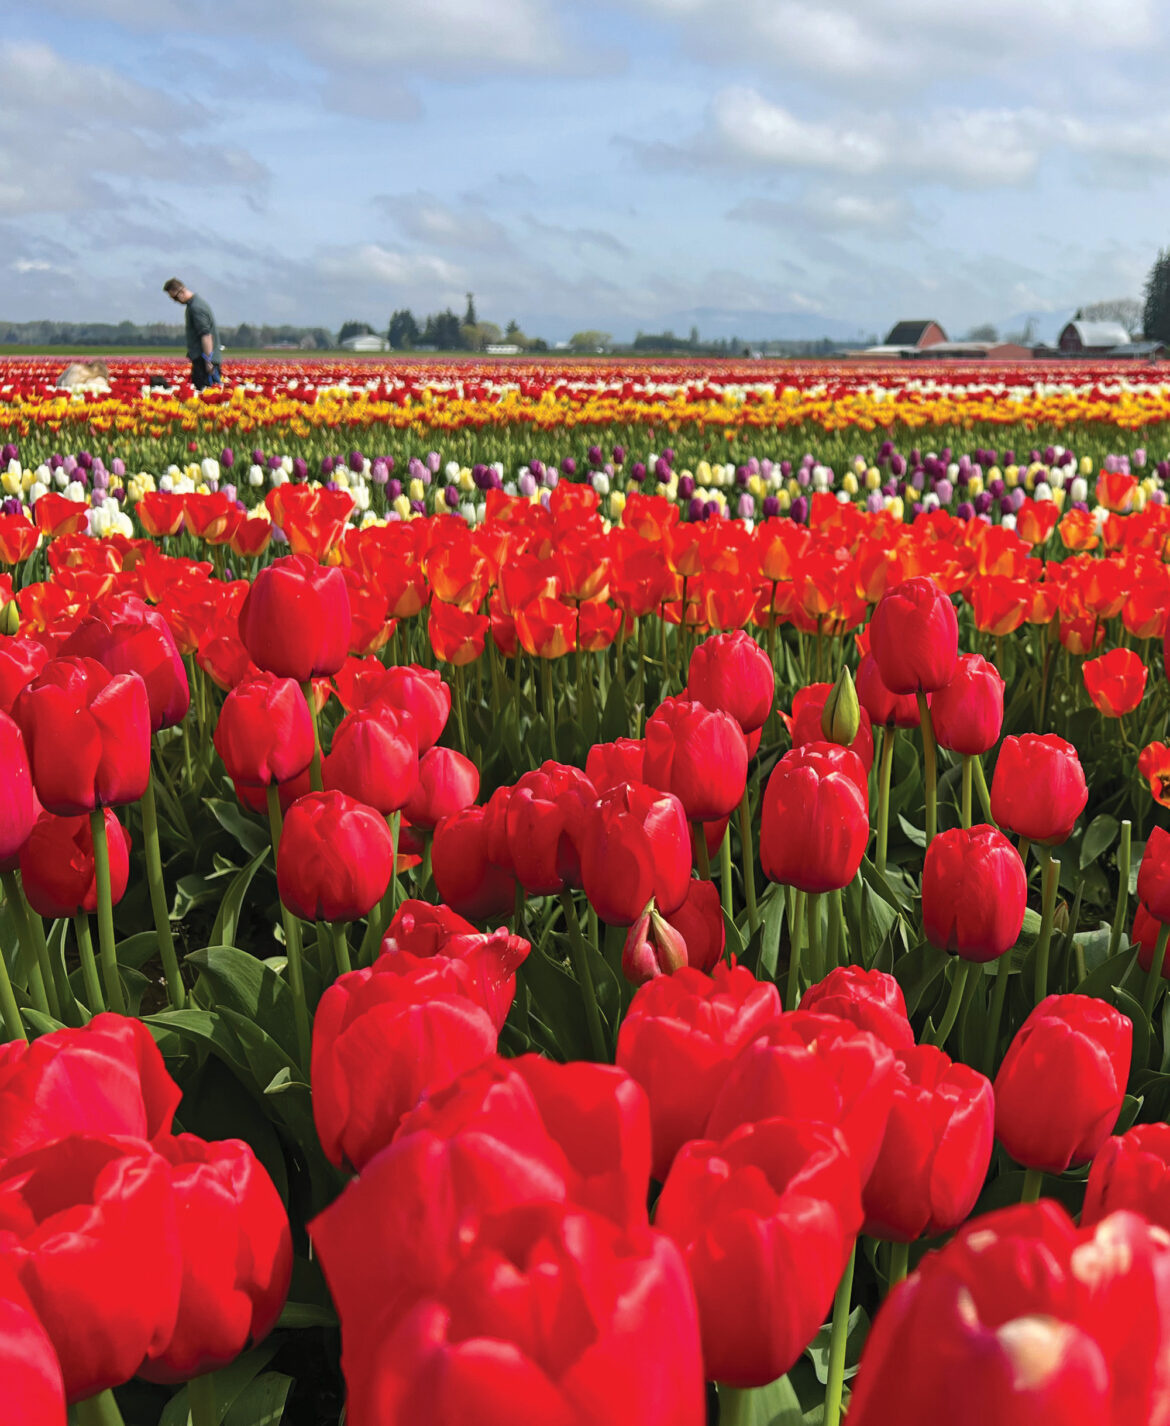 Brilliant blooms are the draw during Skagit Valley Tulip Festival.